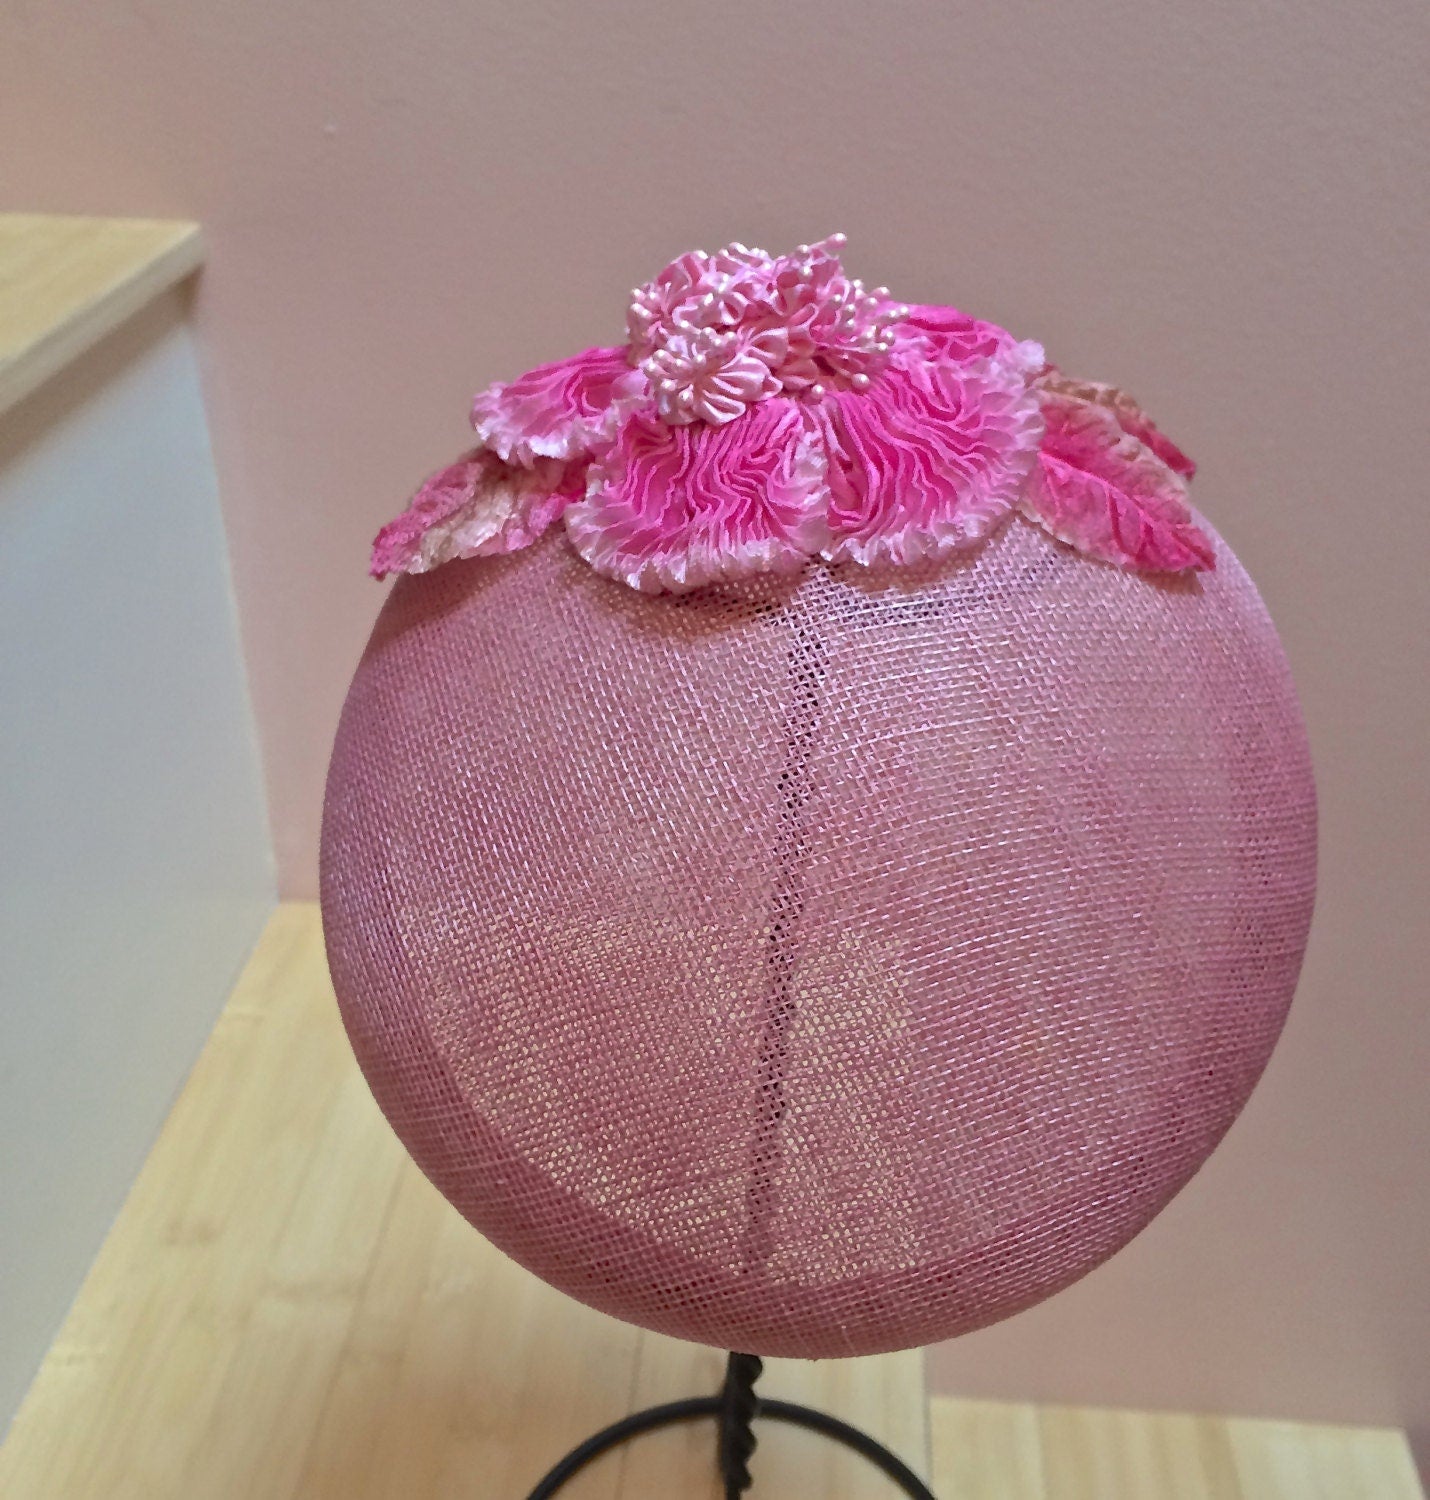 Pink Sinamay Pill Box Hat, Wedding hat, Mother of the Bride hat, Girls hat. Garden party or Church hat. Pink Straw Pill Box Hat with floral